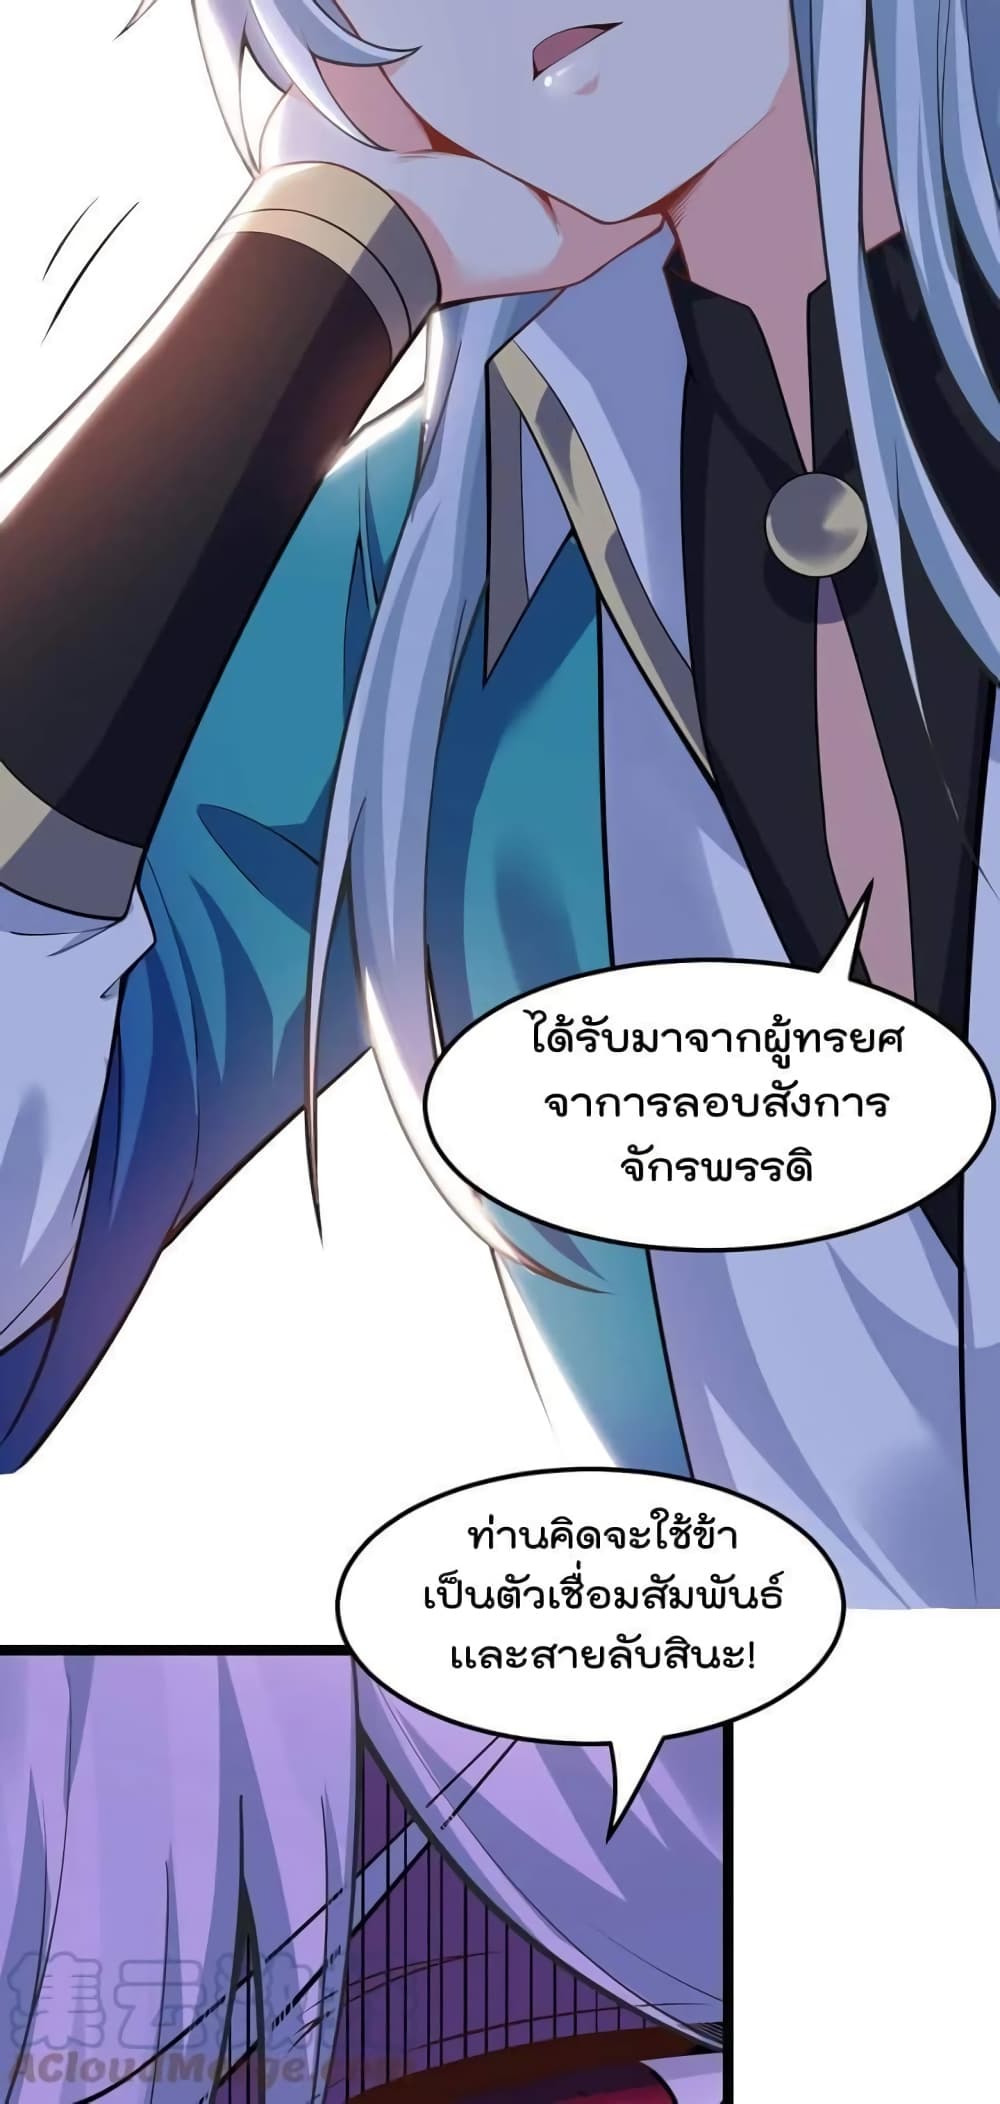 Godsian Masian from Another World ตอนที่ 98 (21)